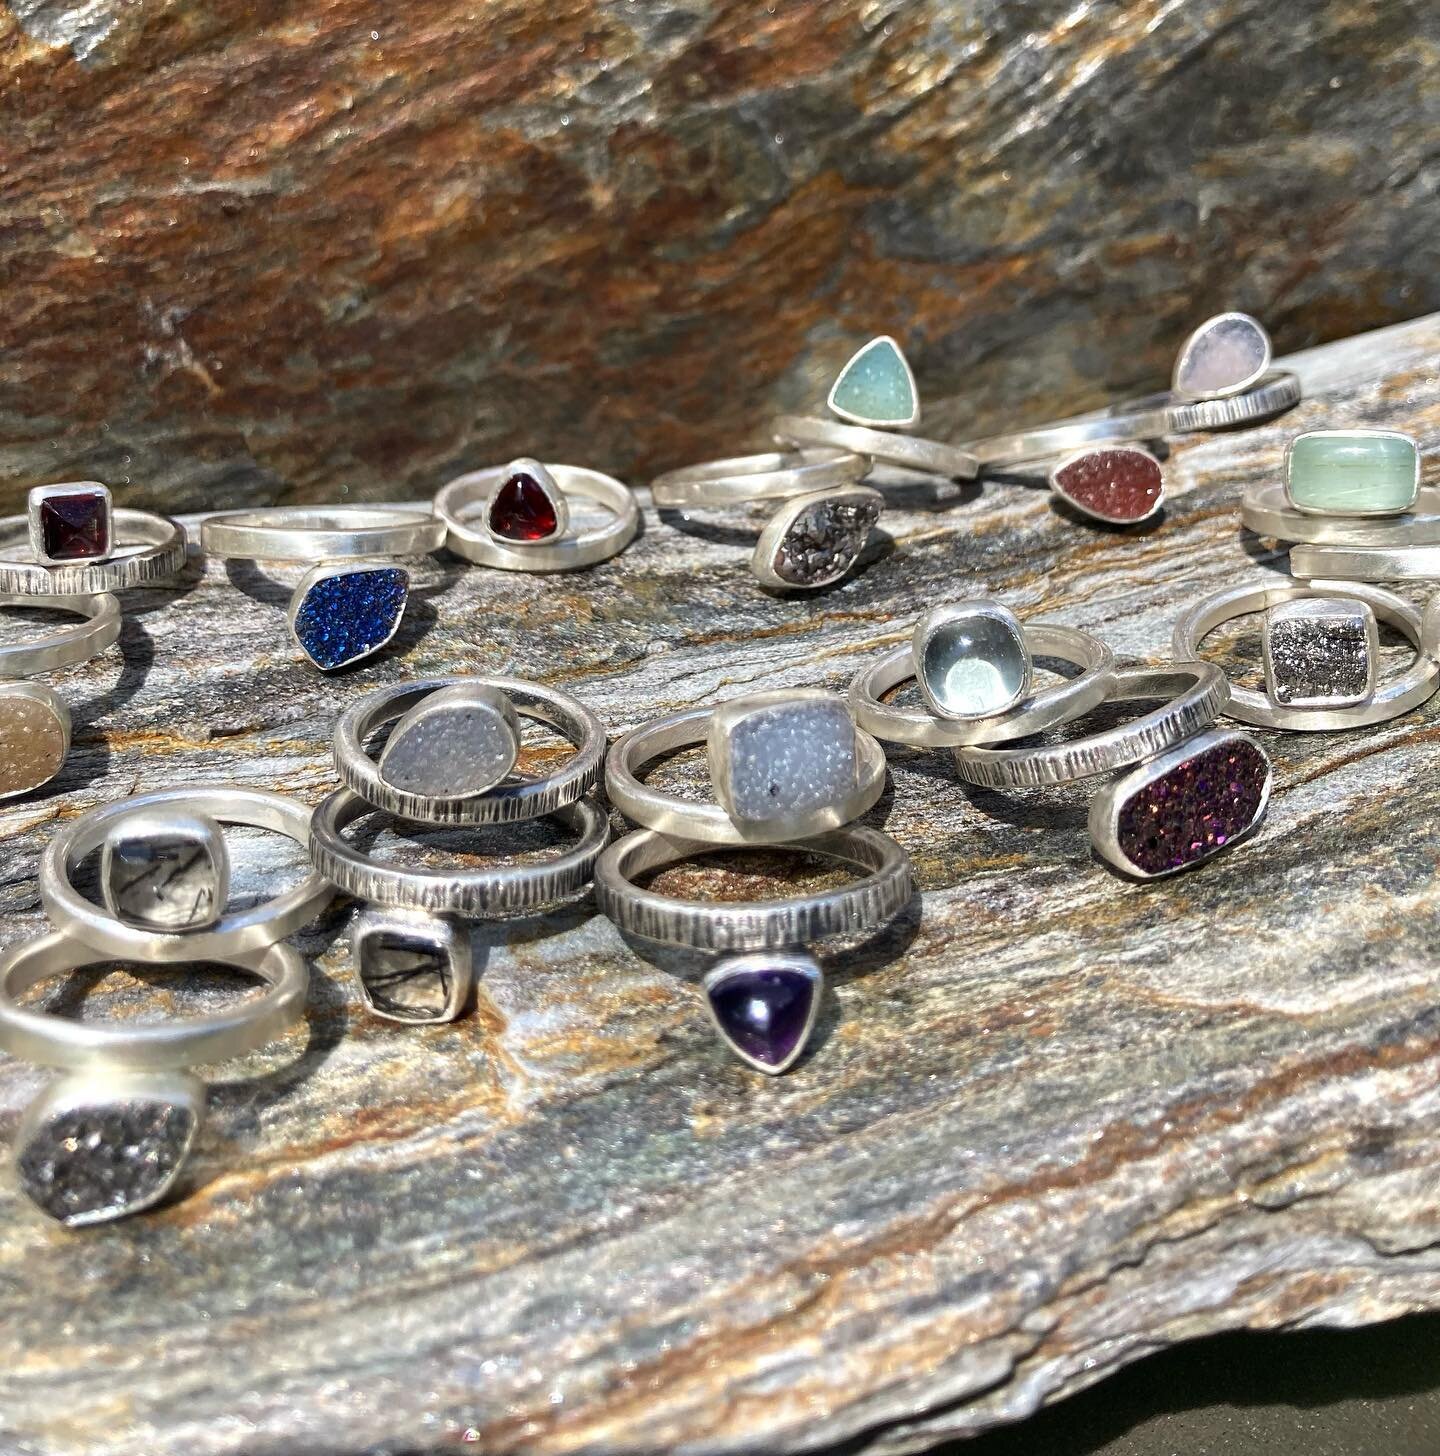 I&rsquo;ll be in Portsmouth this Saturday with @erinmorandesigns for our mini craft show. It&rsquo;s Mother&rsquo;s Day&hellip;jewelry and pottery always make great gifts to give or for yourself😍
lots of fun colors to try in these stacking rings and